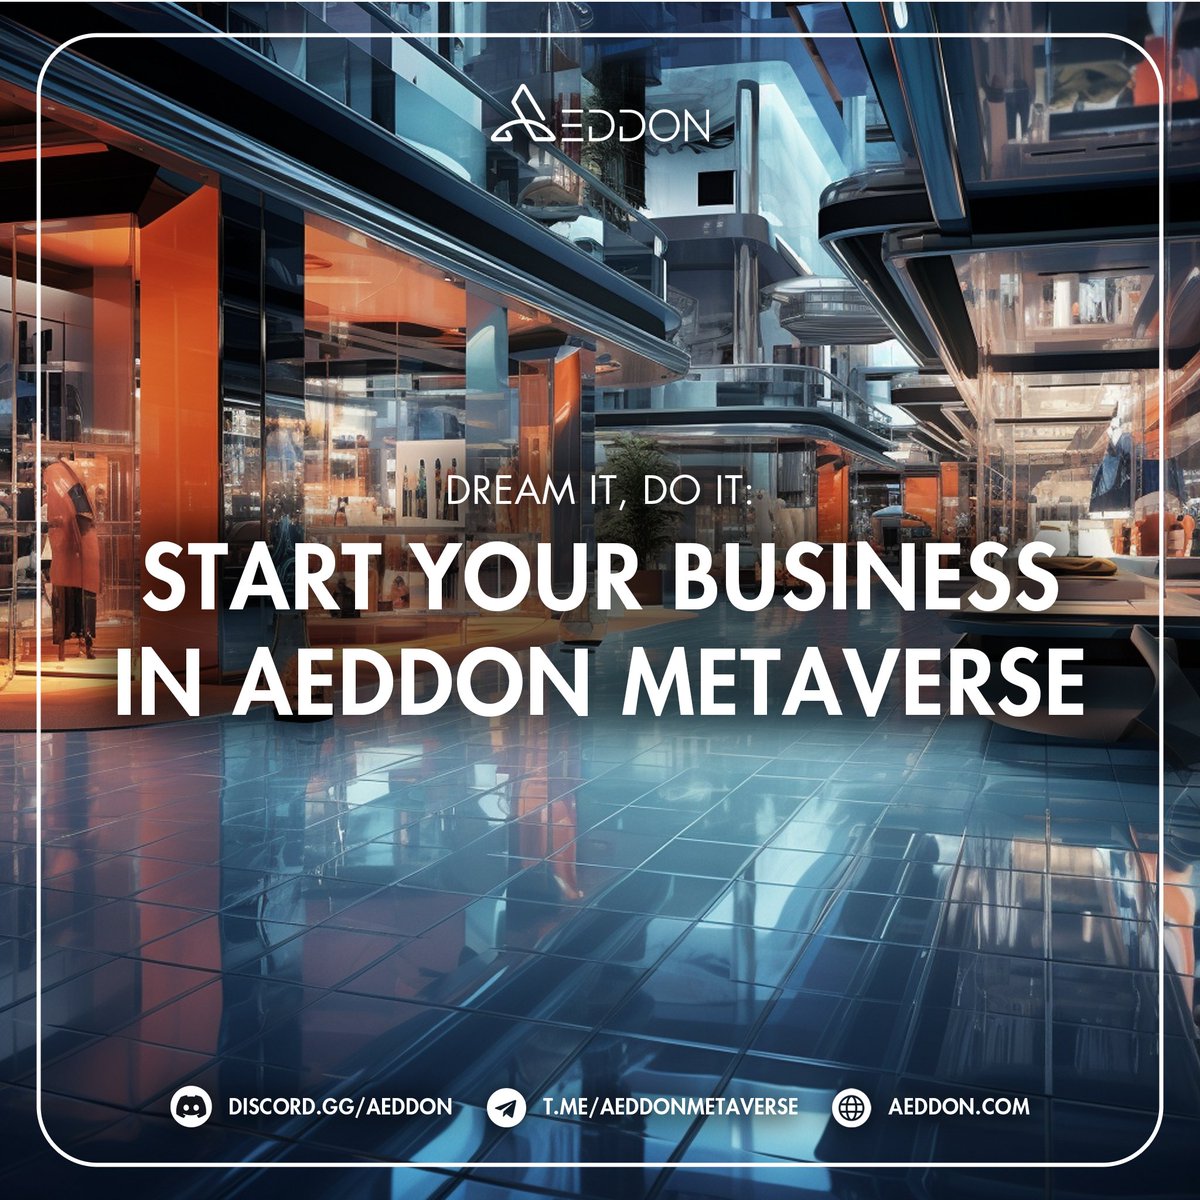 Dreaming of starting your own business?
With Aeddon Metaverse, turn that dream into reality!
🌟 Start your business in our immersive digital world and unleash your entrepreneurial spirit like never before.
🚀 #AeddonMetaverse #VirtualBusiness #DreamBig